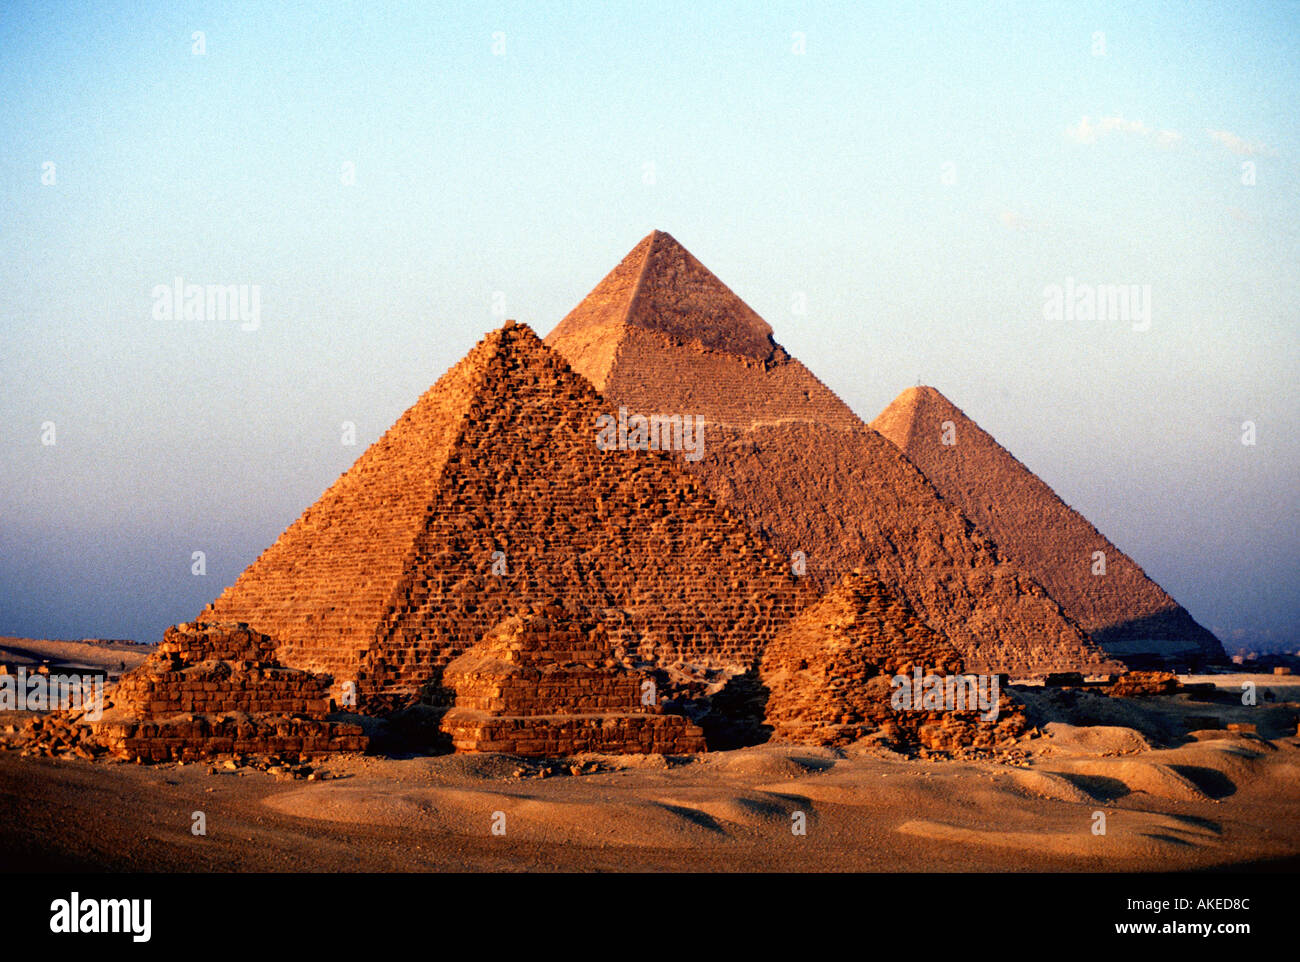 The Great Pyramids at Giza near Cairo Egypt appear golden at sunset Stock Photo